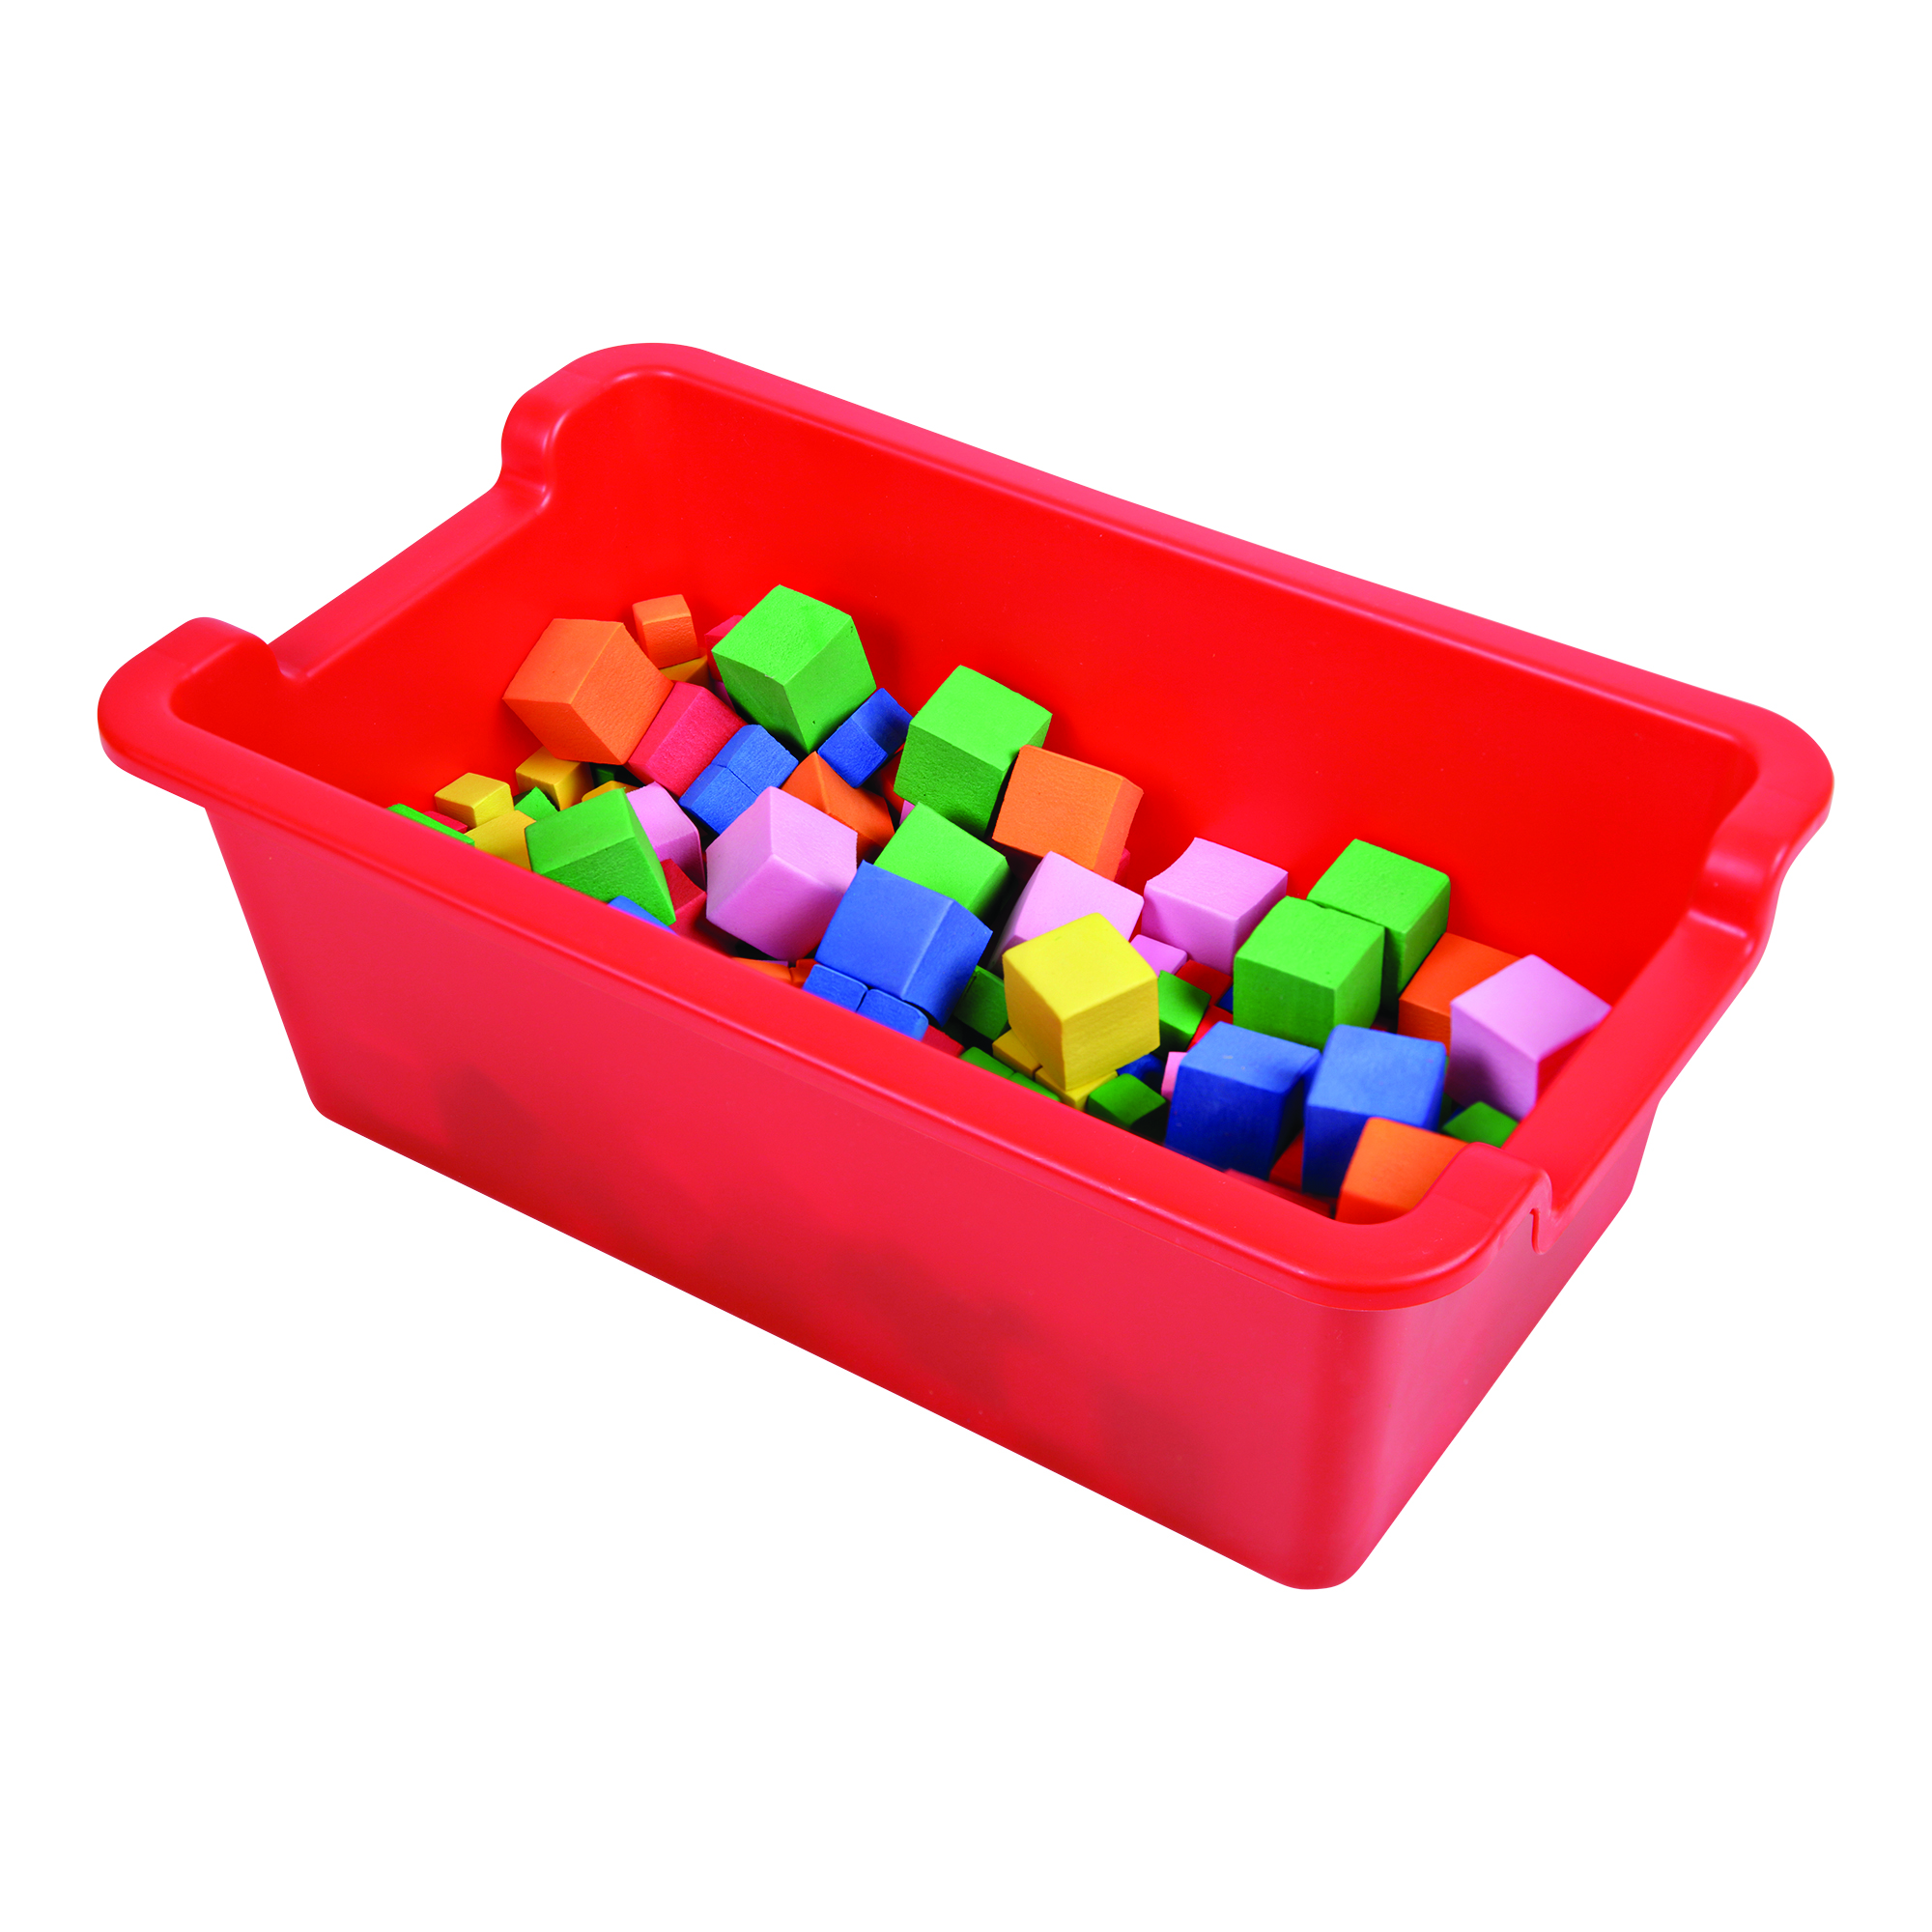 Antimicrobial Kids 6 Cup Caddy - Deflecto